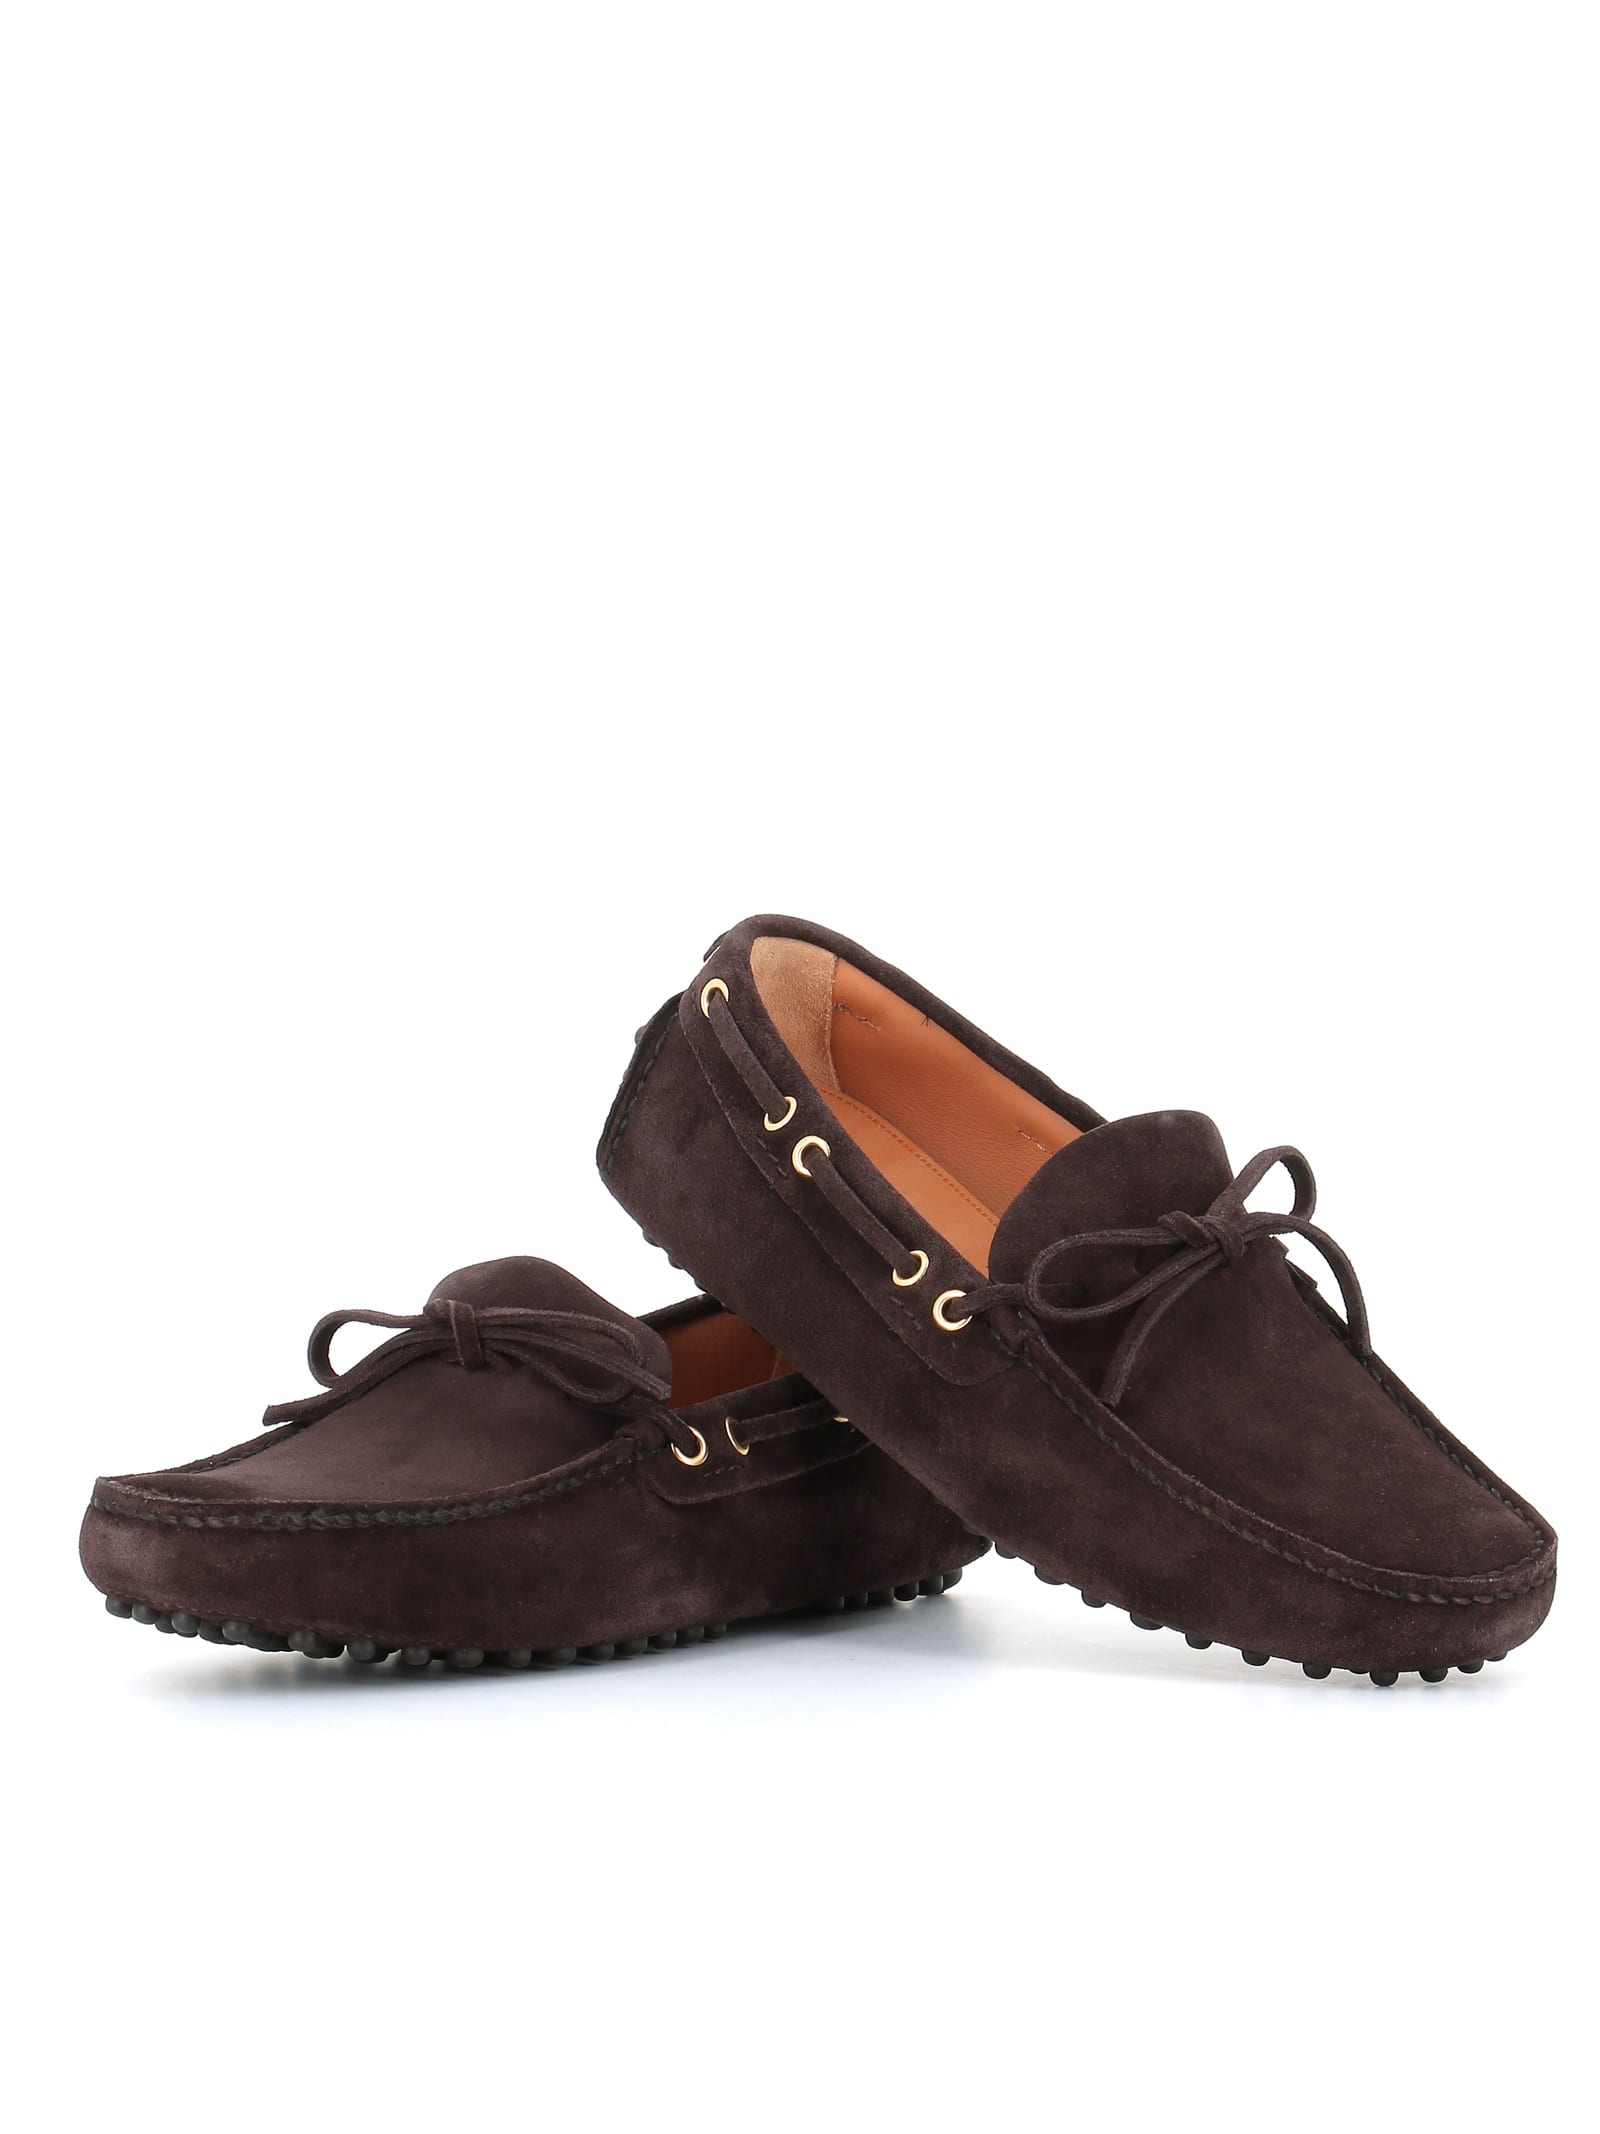 Car Shoes Driving Loafers Kud006